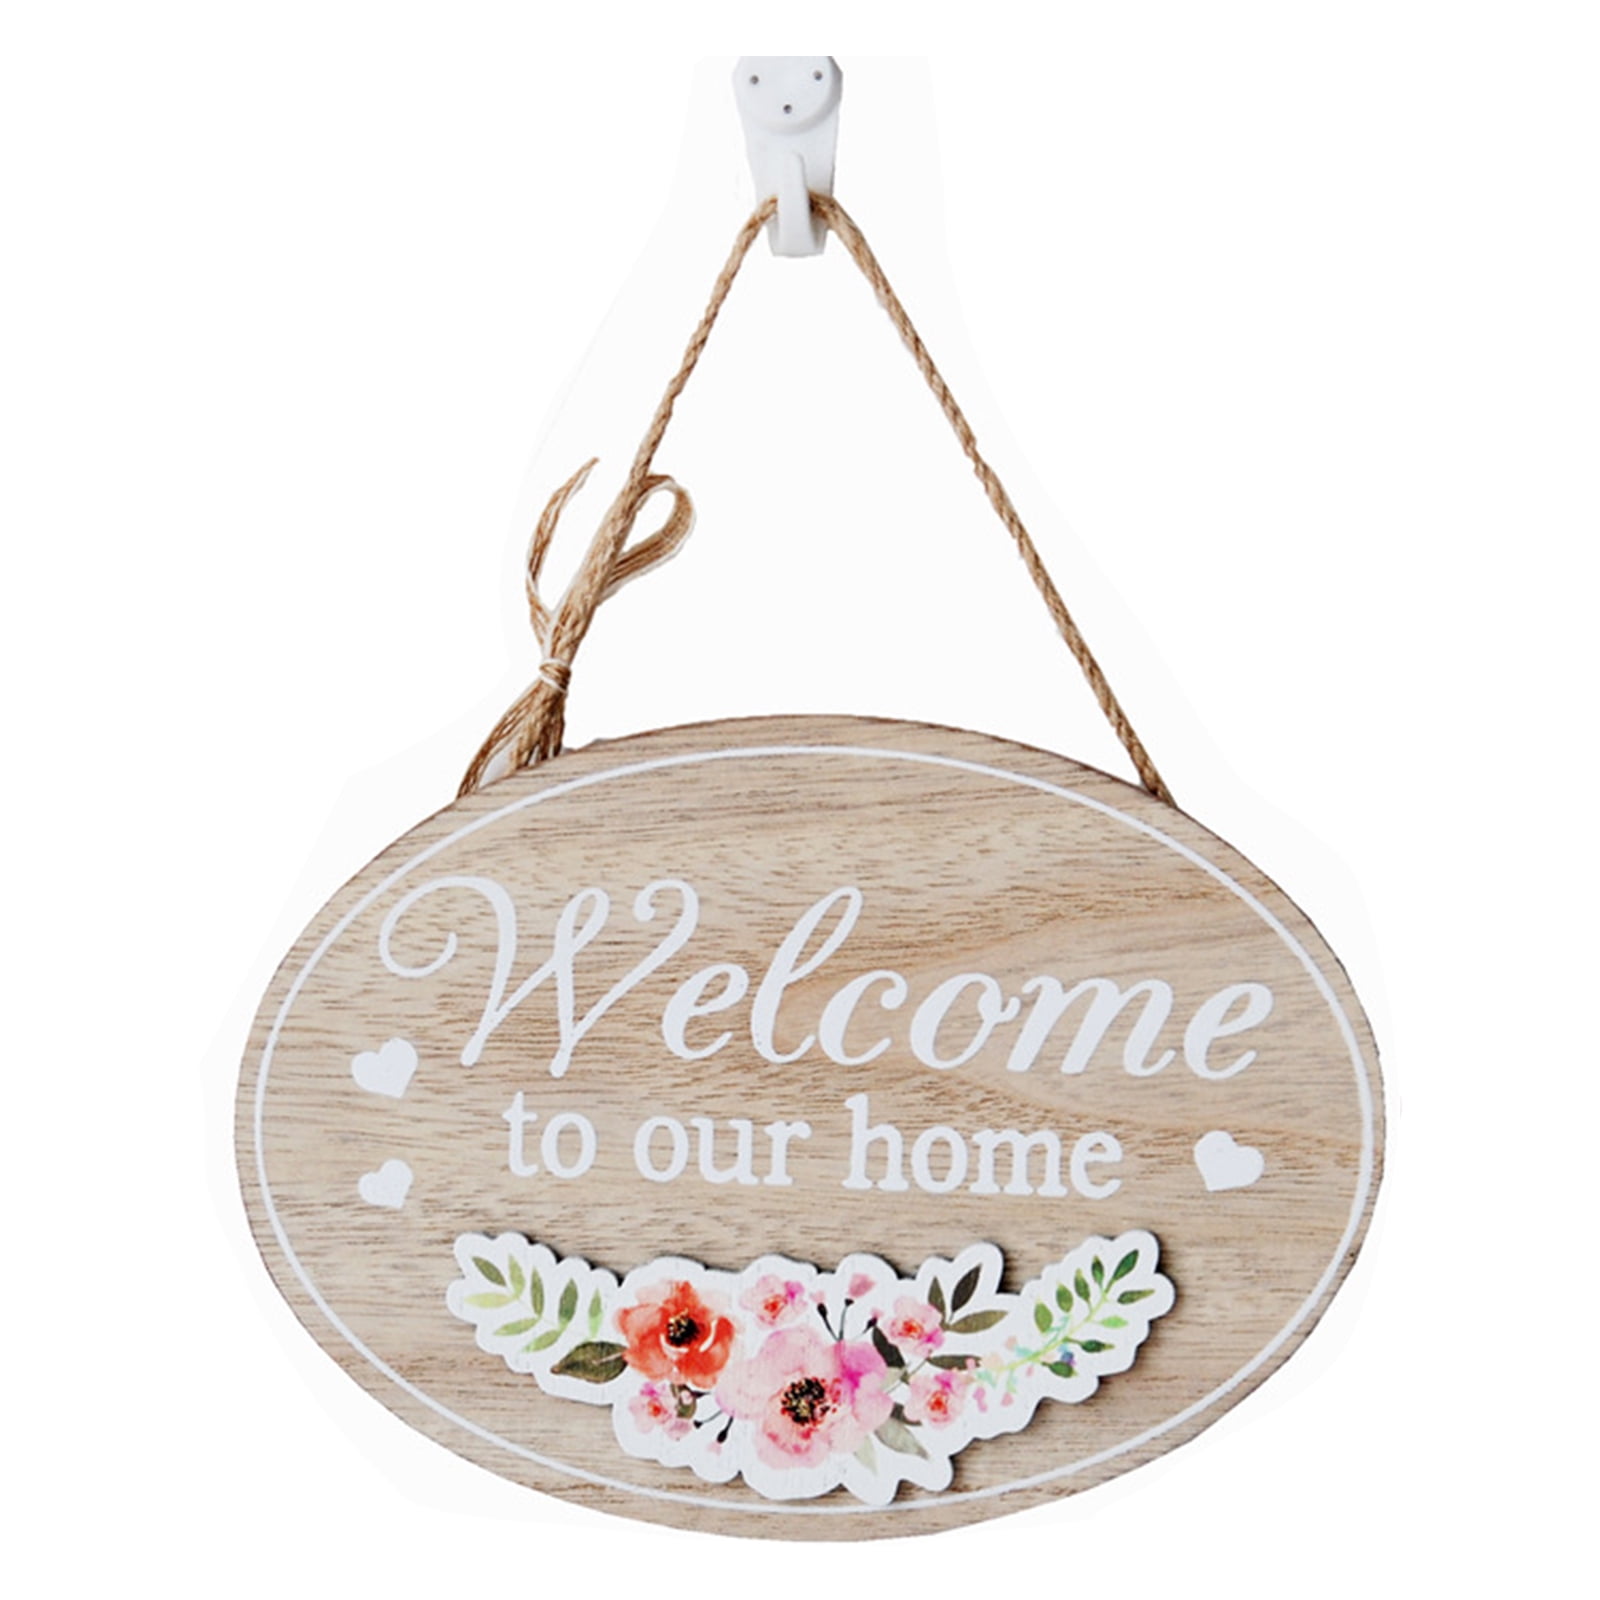 B/C Welcome Sign for Front Door Bowknot Front Door Decor Door Sign for Entrance Porch of Home Office or Store Hanger Home Wood Wreath Decoration